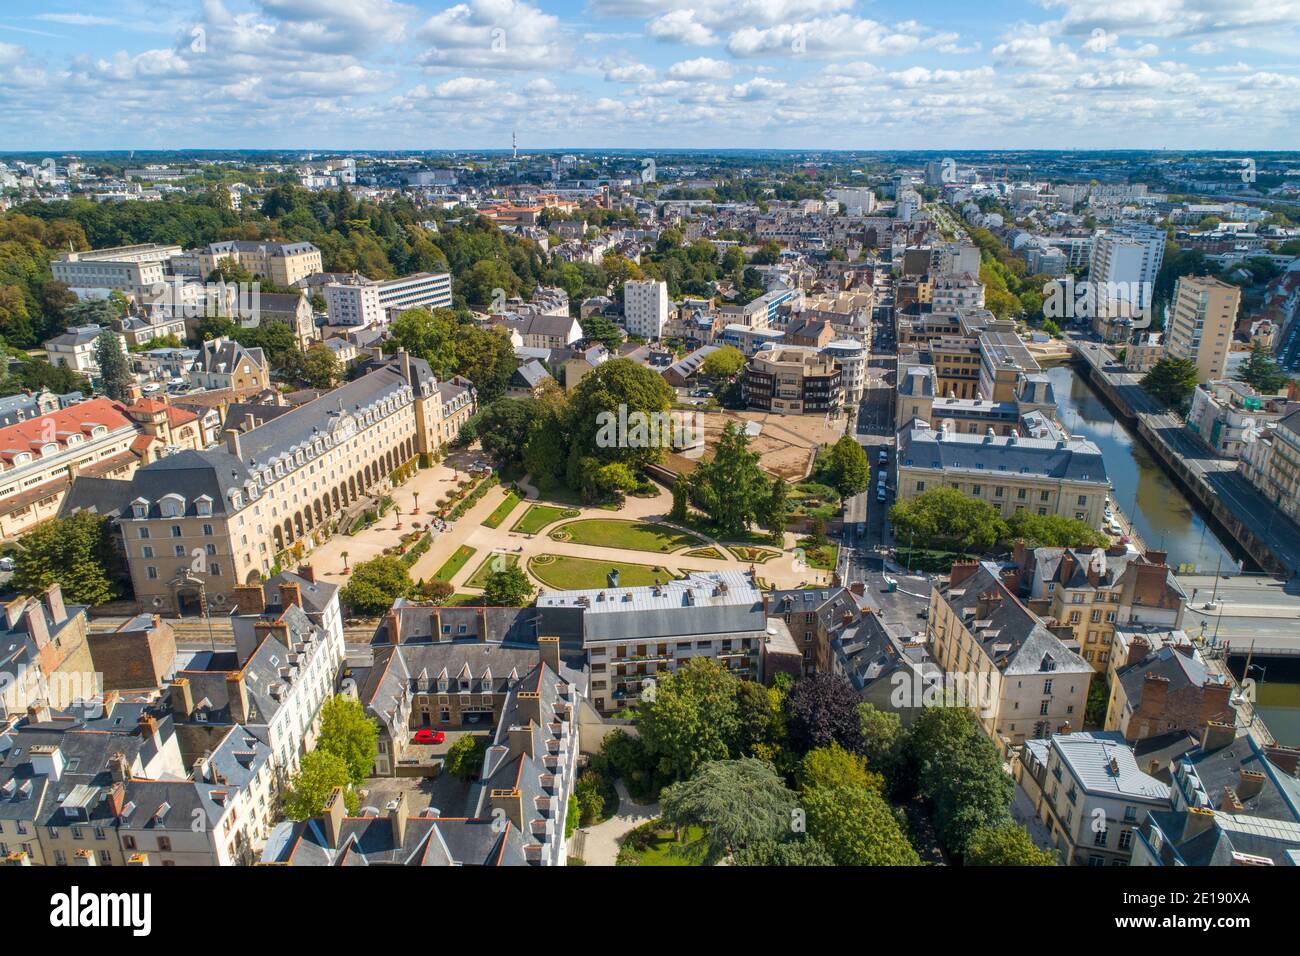 Rennes (Brittany, north-western France): aerial view of the city centre and the Palais Saint-Georges (Palace of St George) On the right, the Vilaine R Stock Photo